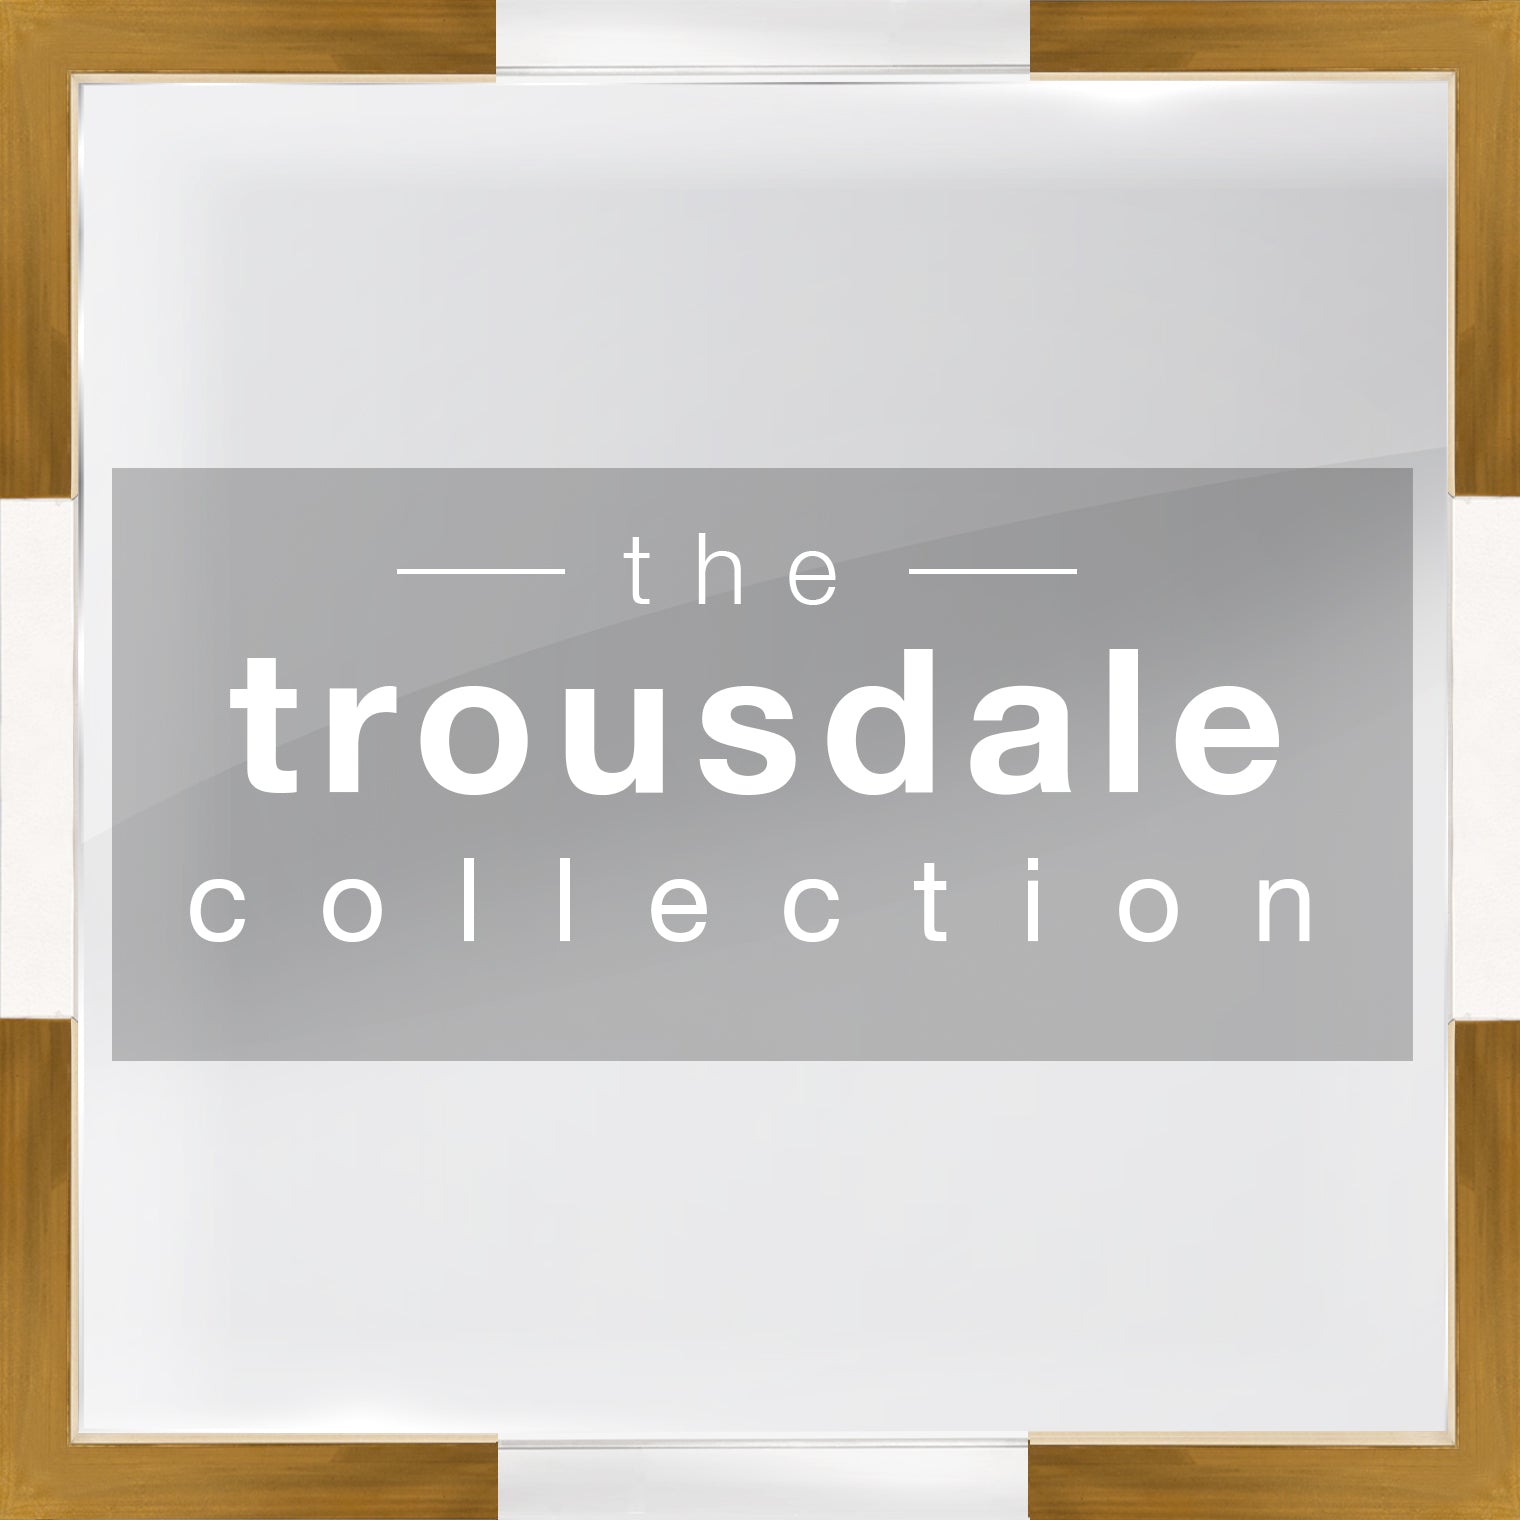 Gray background, gold-brown and white block border, white-lettered 'the Trousdale Collection' inside center shaded rectangle